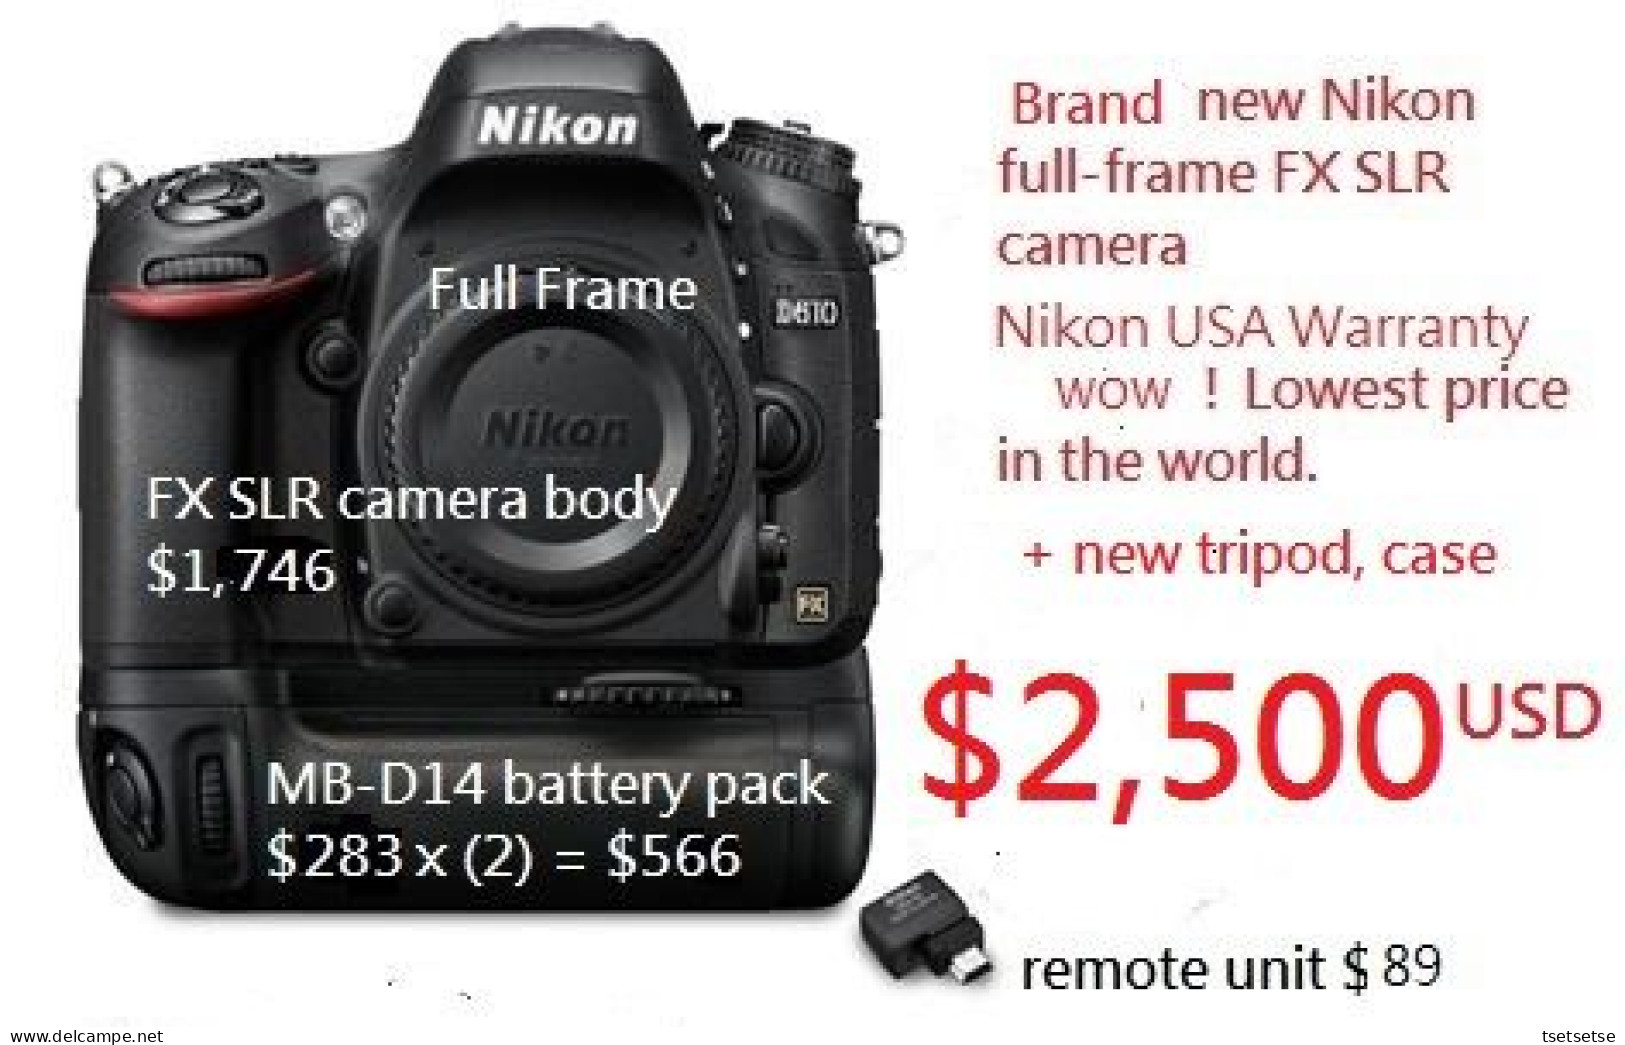 Your Choice $2,032 Or $1,099? "Brand NEW" Nikon Full-frame FX D610 DSLR Camera Kit - Fotoapparate